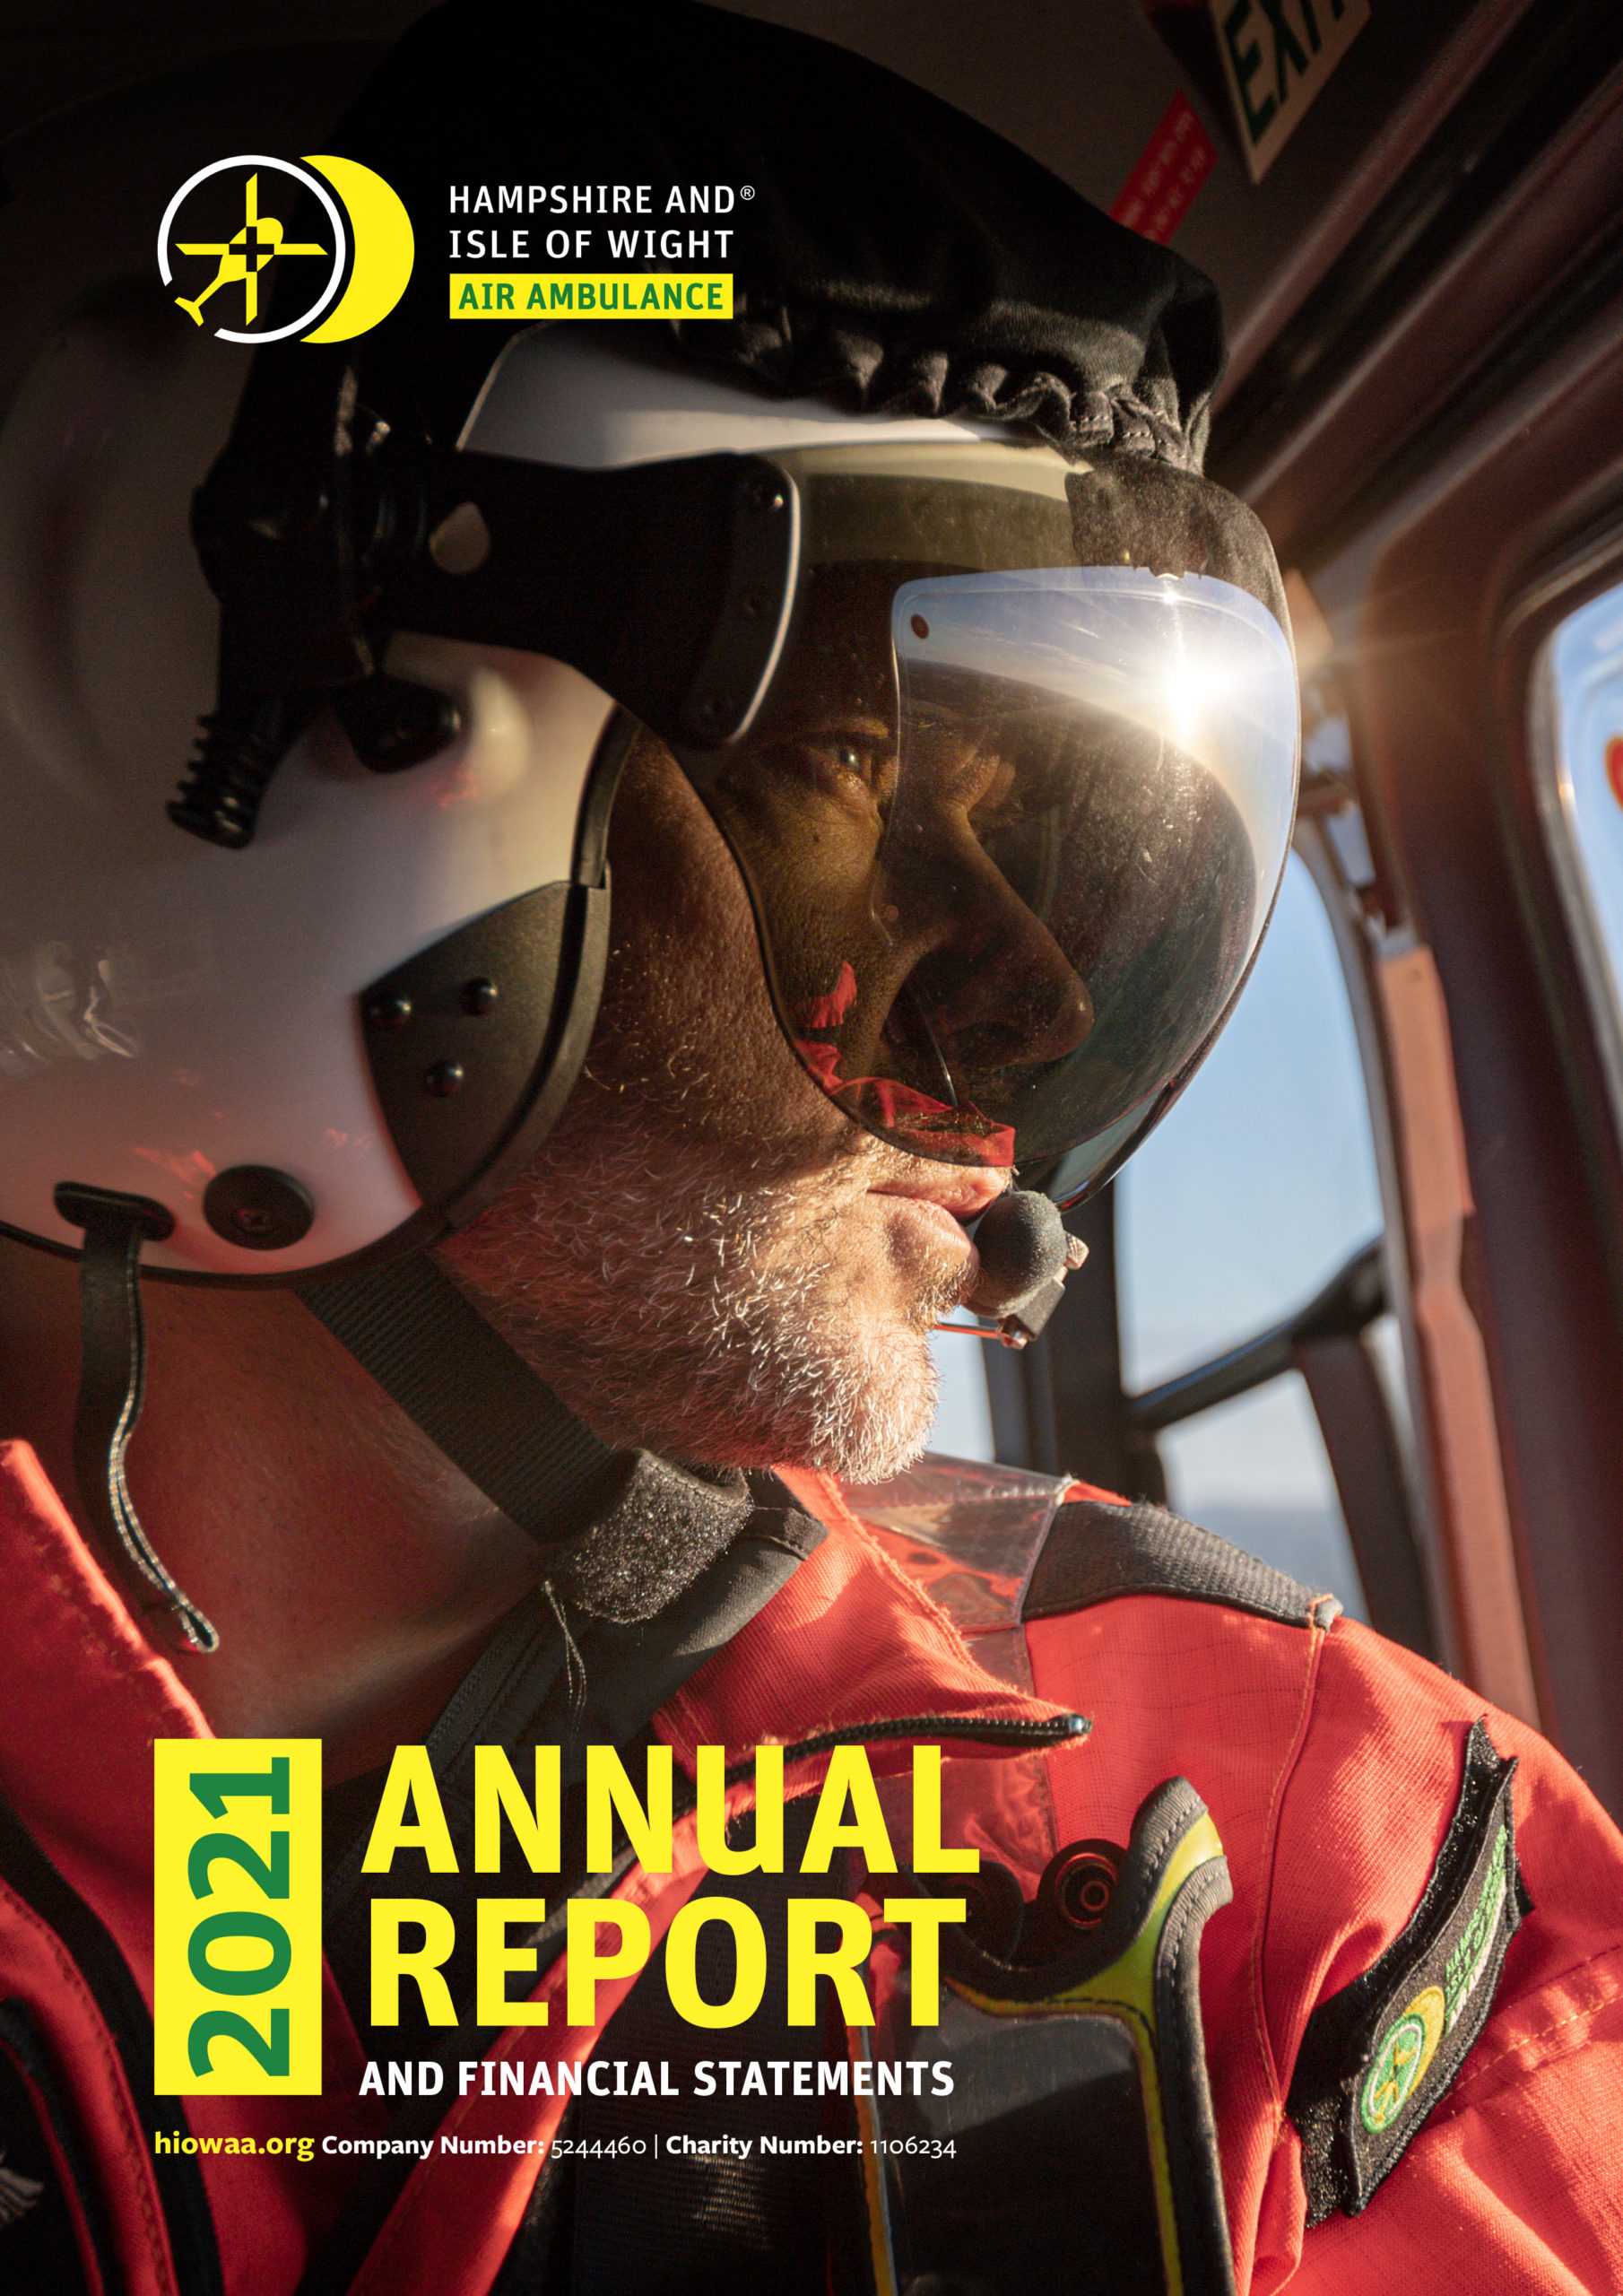 Annual Report 2020-21 - Front cover shows Dr Ben looking out of the helicopter window and the sun hitting the visor of his flight helmet